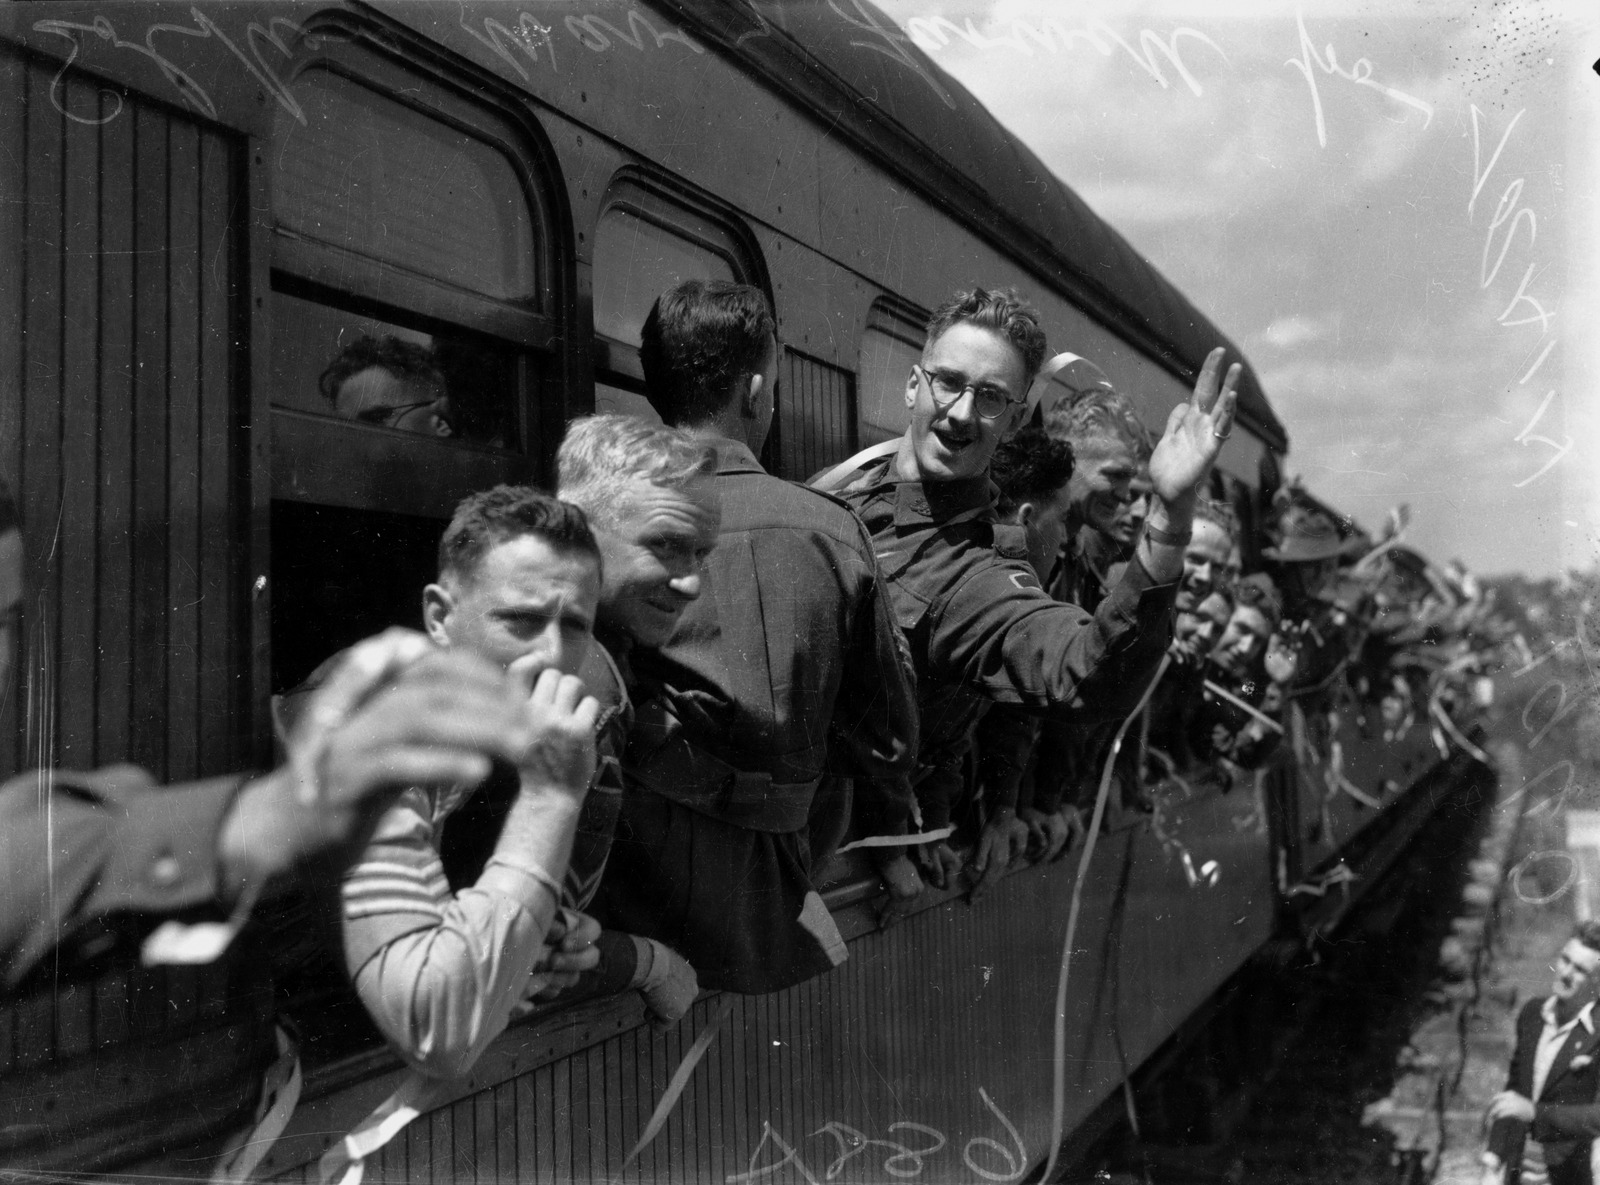 Soldiers lined up waiting to board the train and saying goodbye 